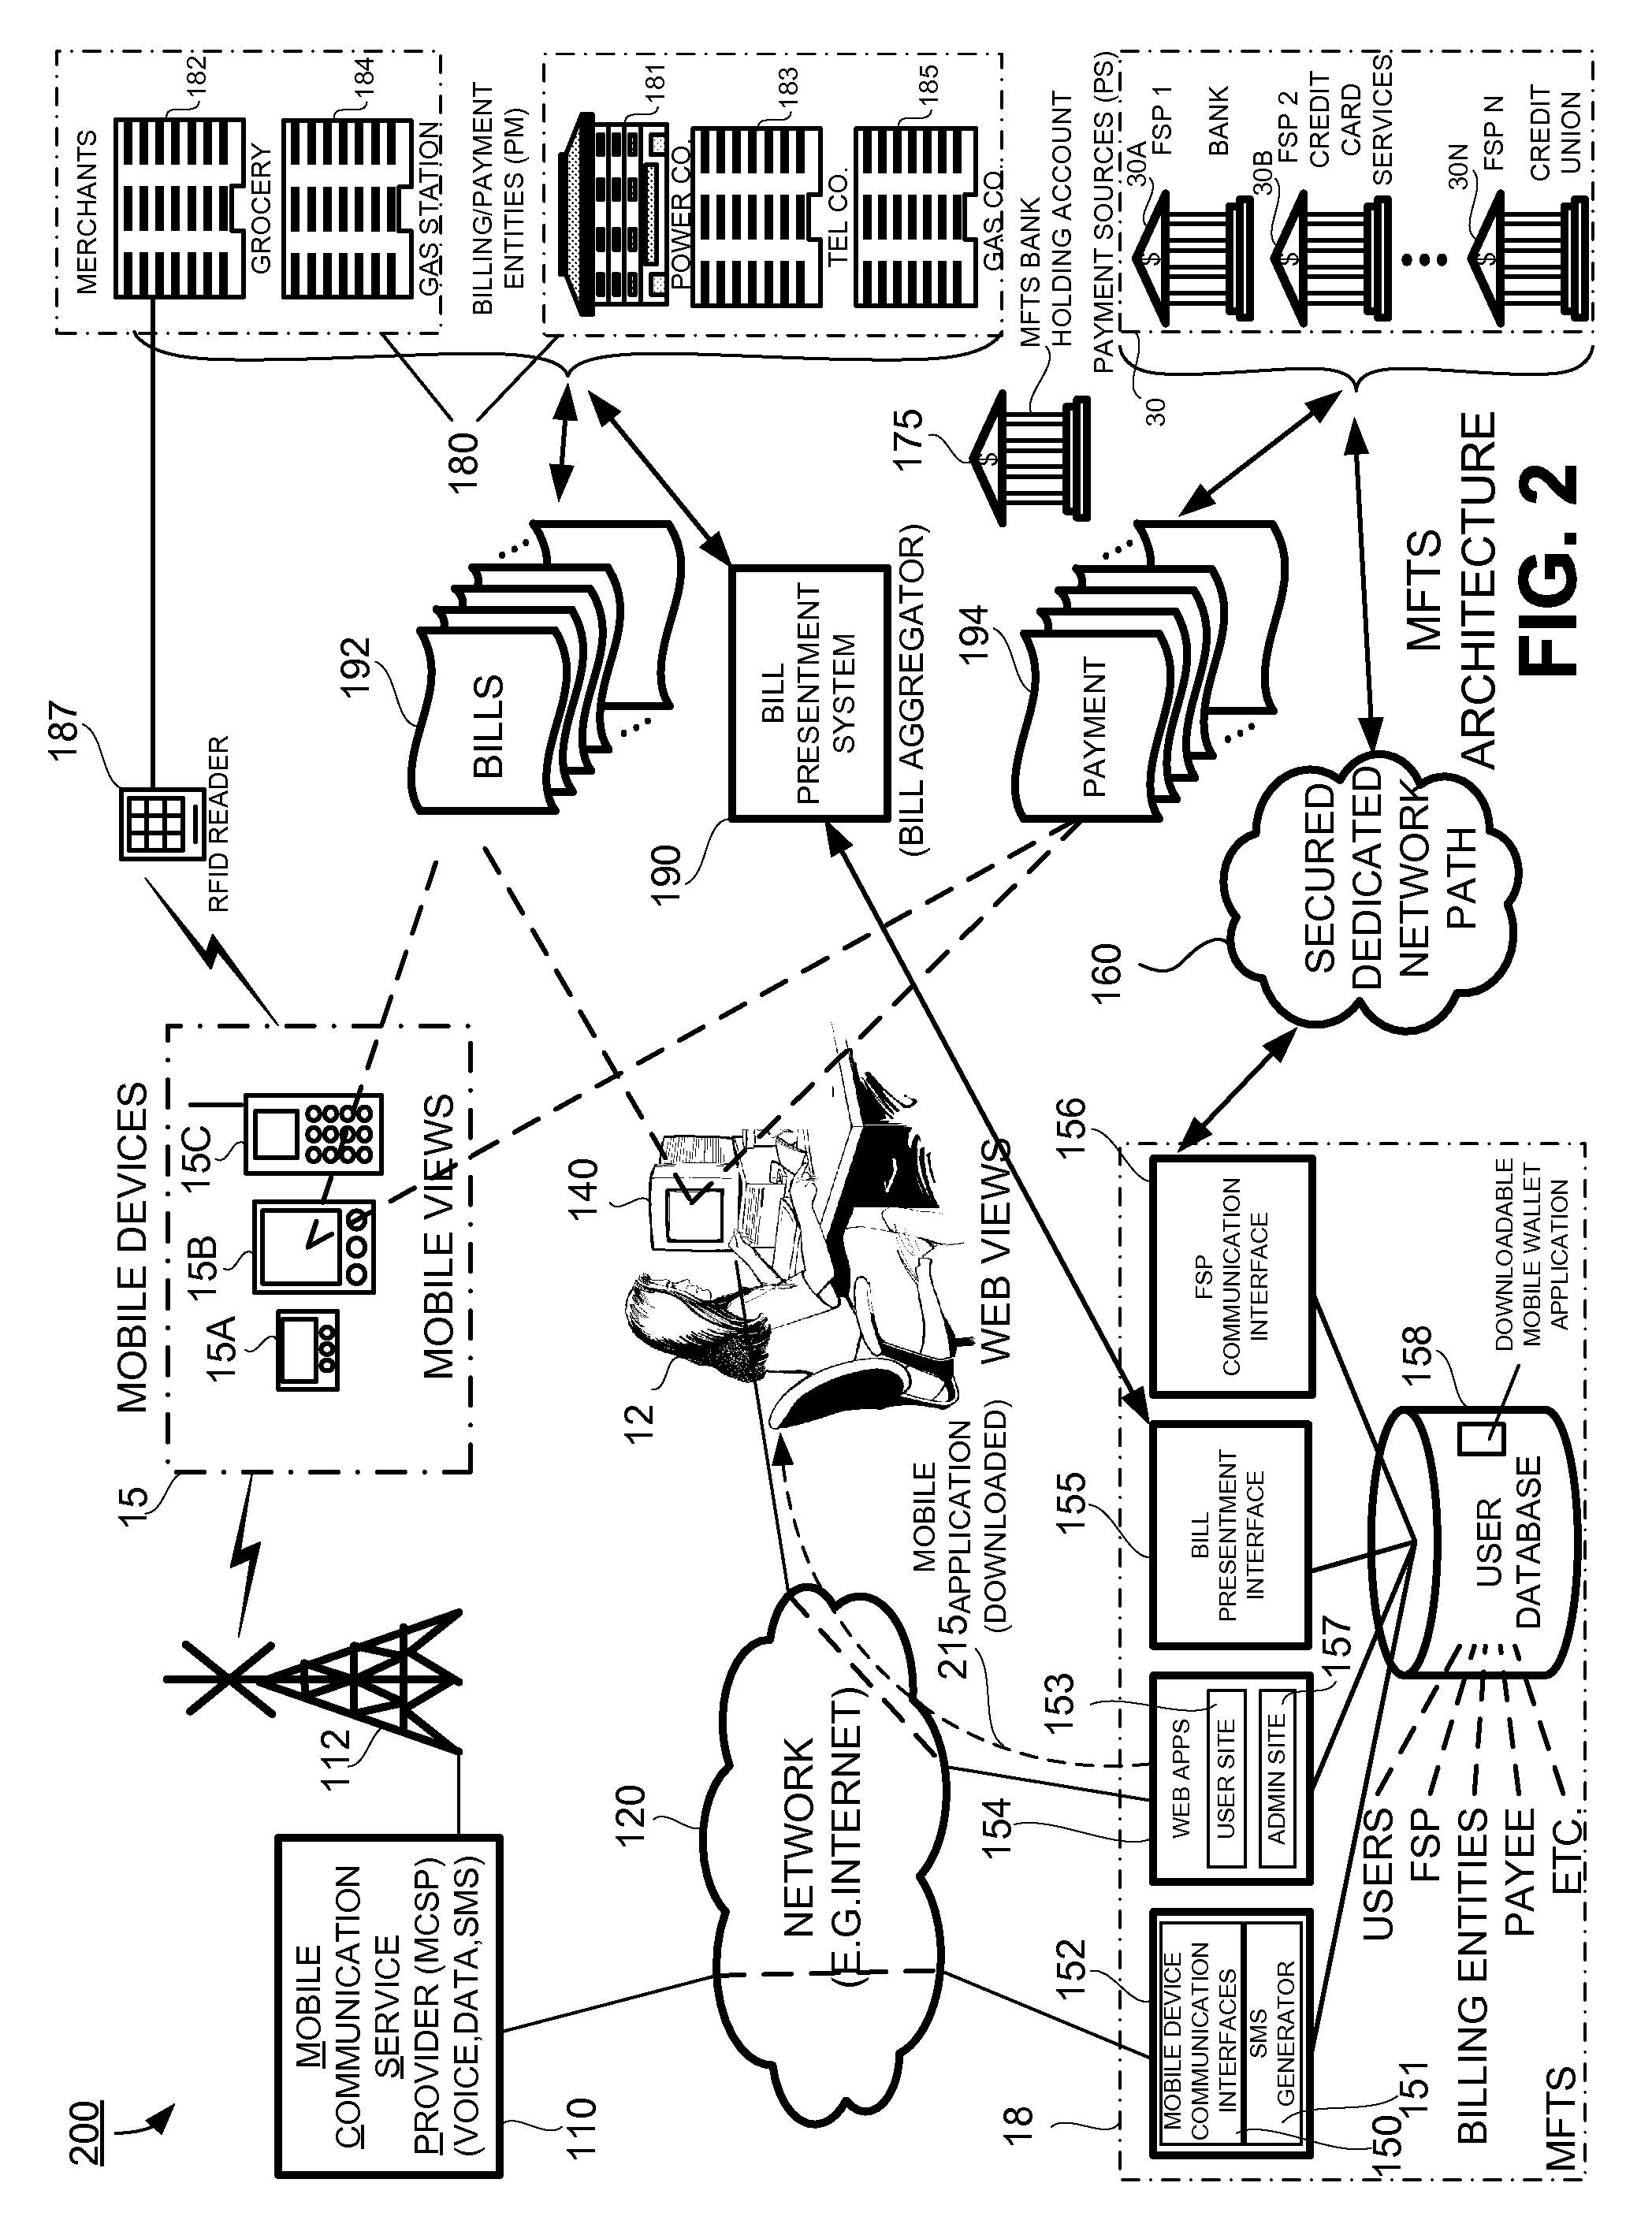 Methods and Systems For Managing Payment Sources in a Mobile Environment